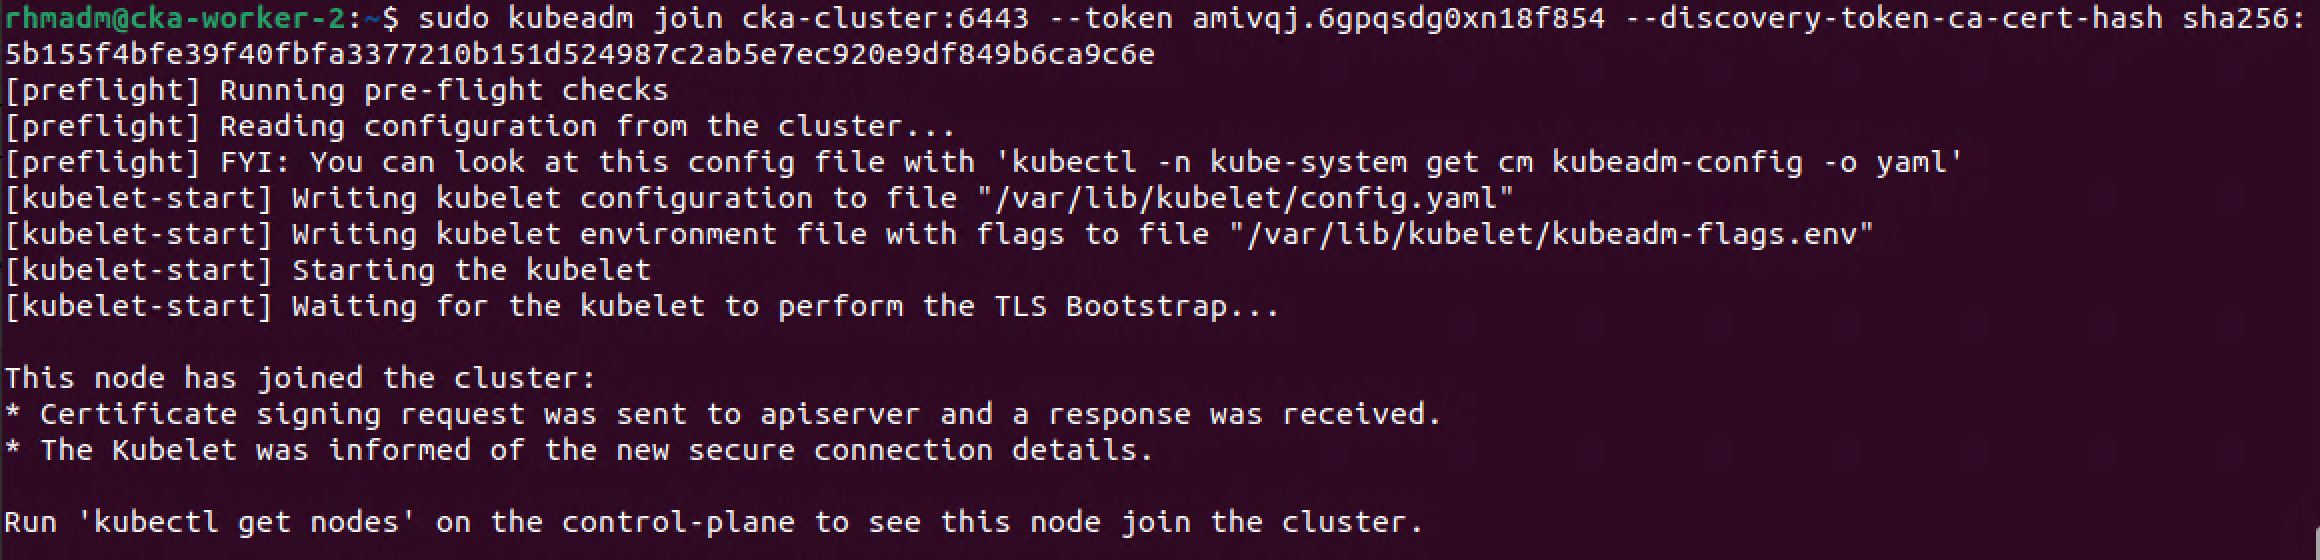 Add second node to cluster